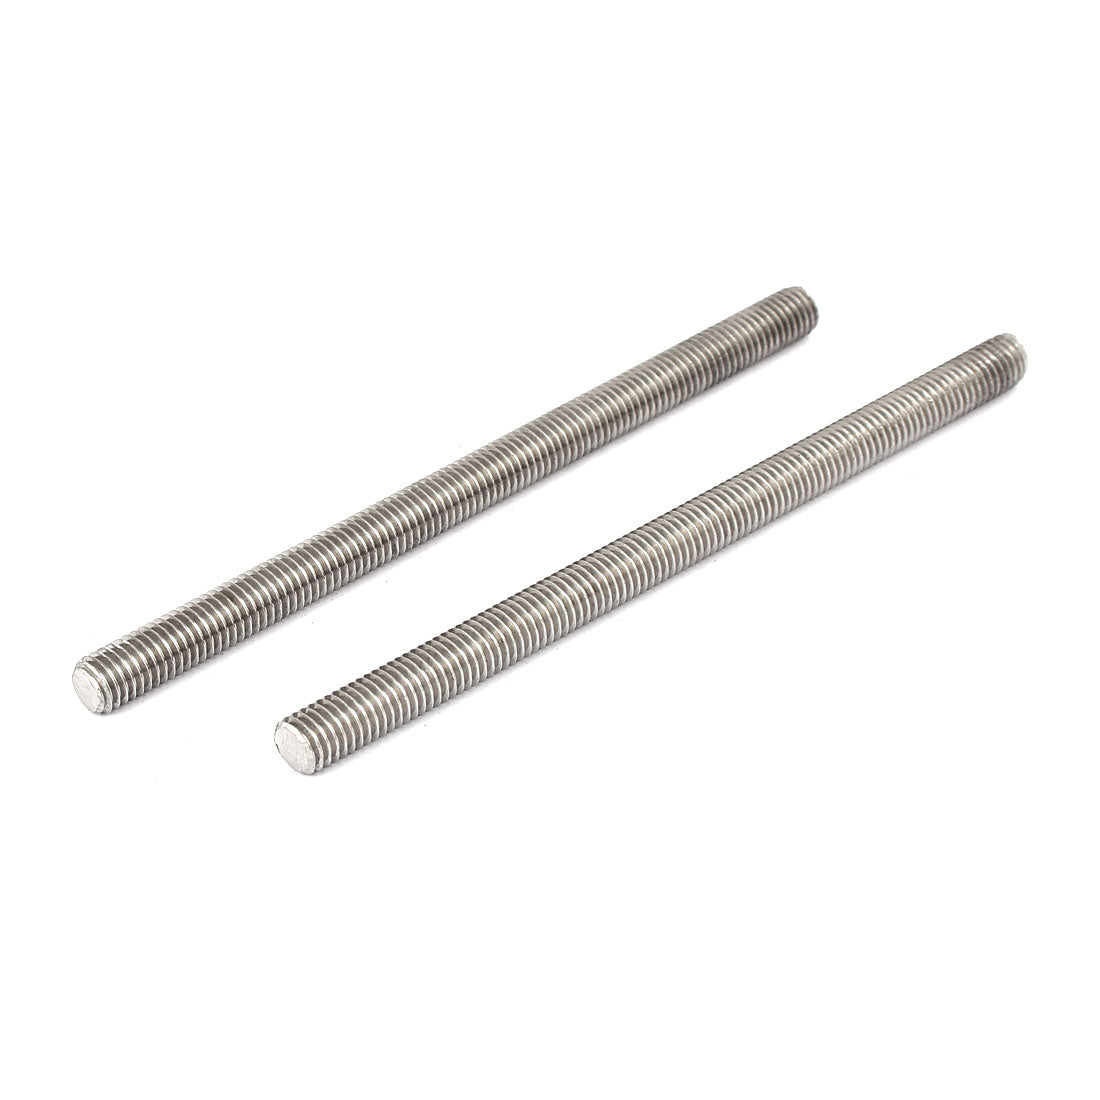 uxcell Uxcell M8 x 130mm 304 Stainless Steel Fully Threaded Rods Fasteners Silver Tone 5 Pcs